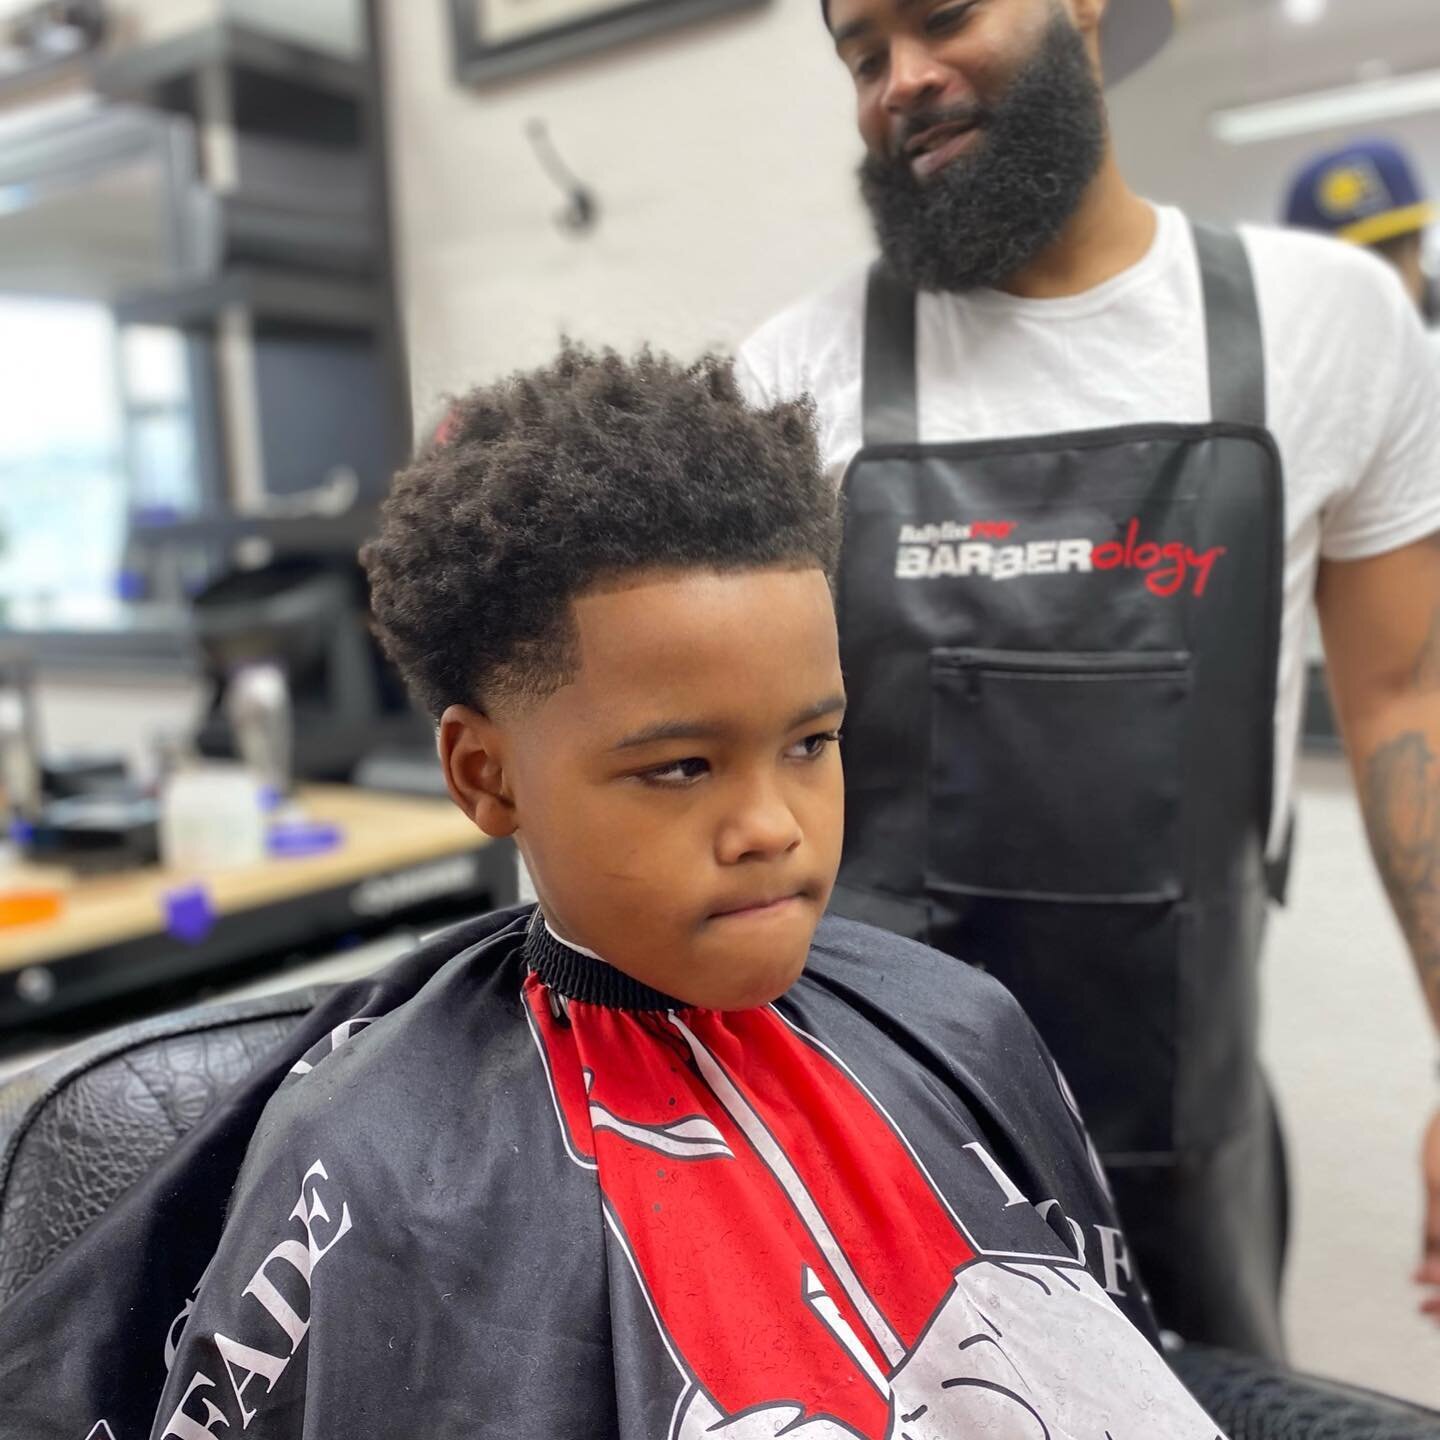 🤴🏾 Young King getting his crown right
✂️ The Duke cut by: Trigg the Barber
💈 Book online. ‼️ Hit the link in bio!
.
.
.
.
.
.
#UltimateBarber #MidwestBarbers #BlackBoy #BarberLife #Barber #Barbershop #StayHandsome #BarbershopConnect #NaturalHair #